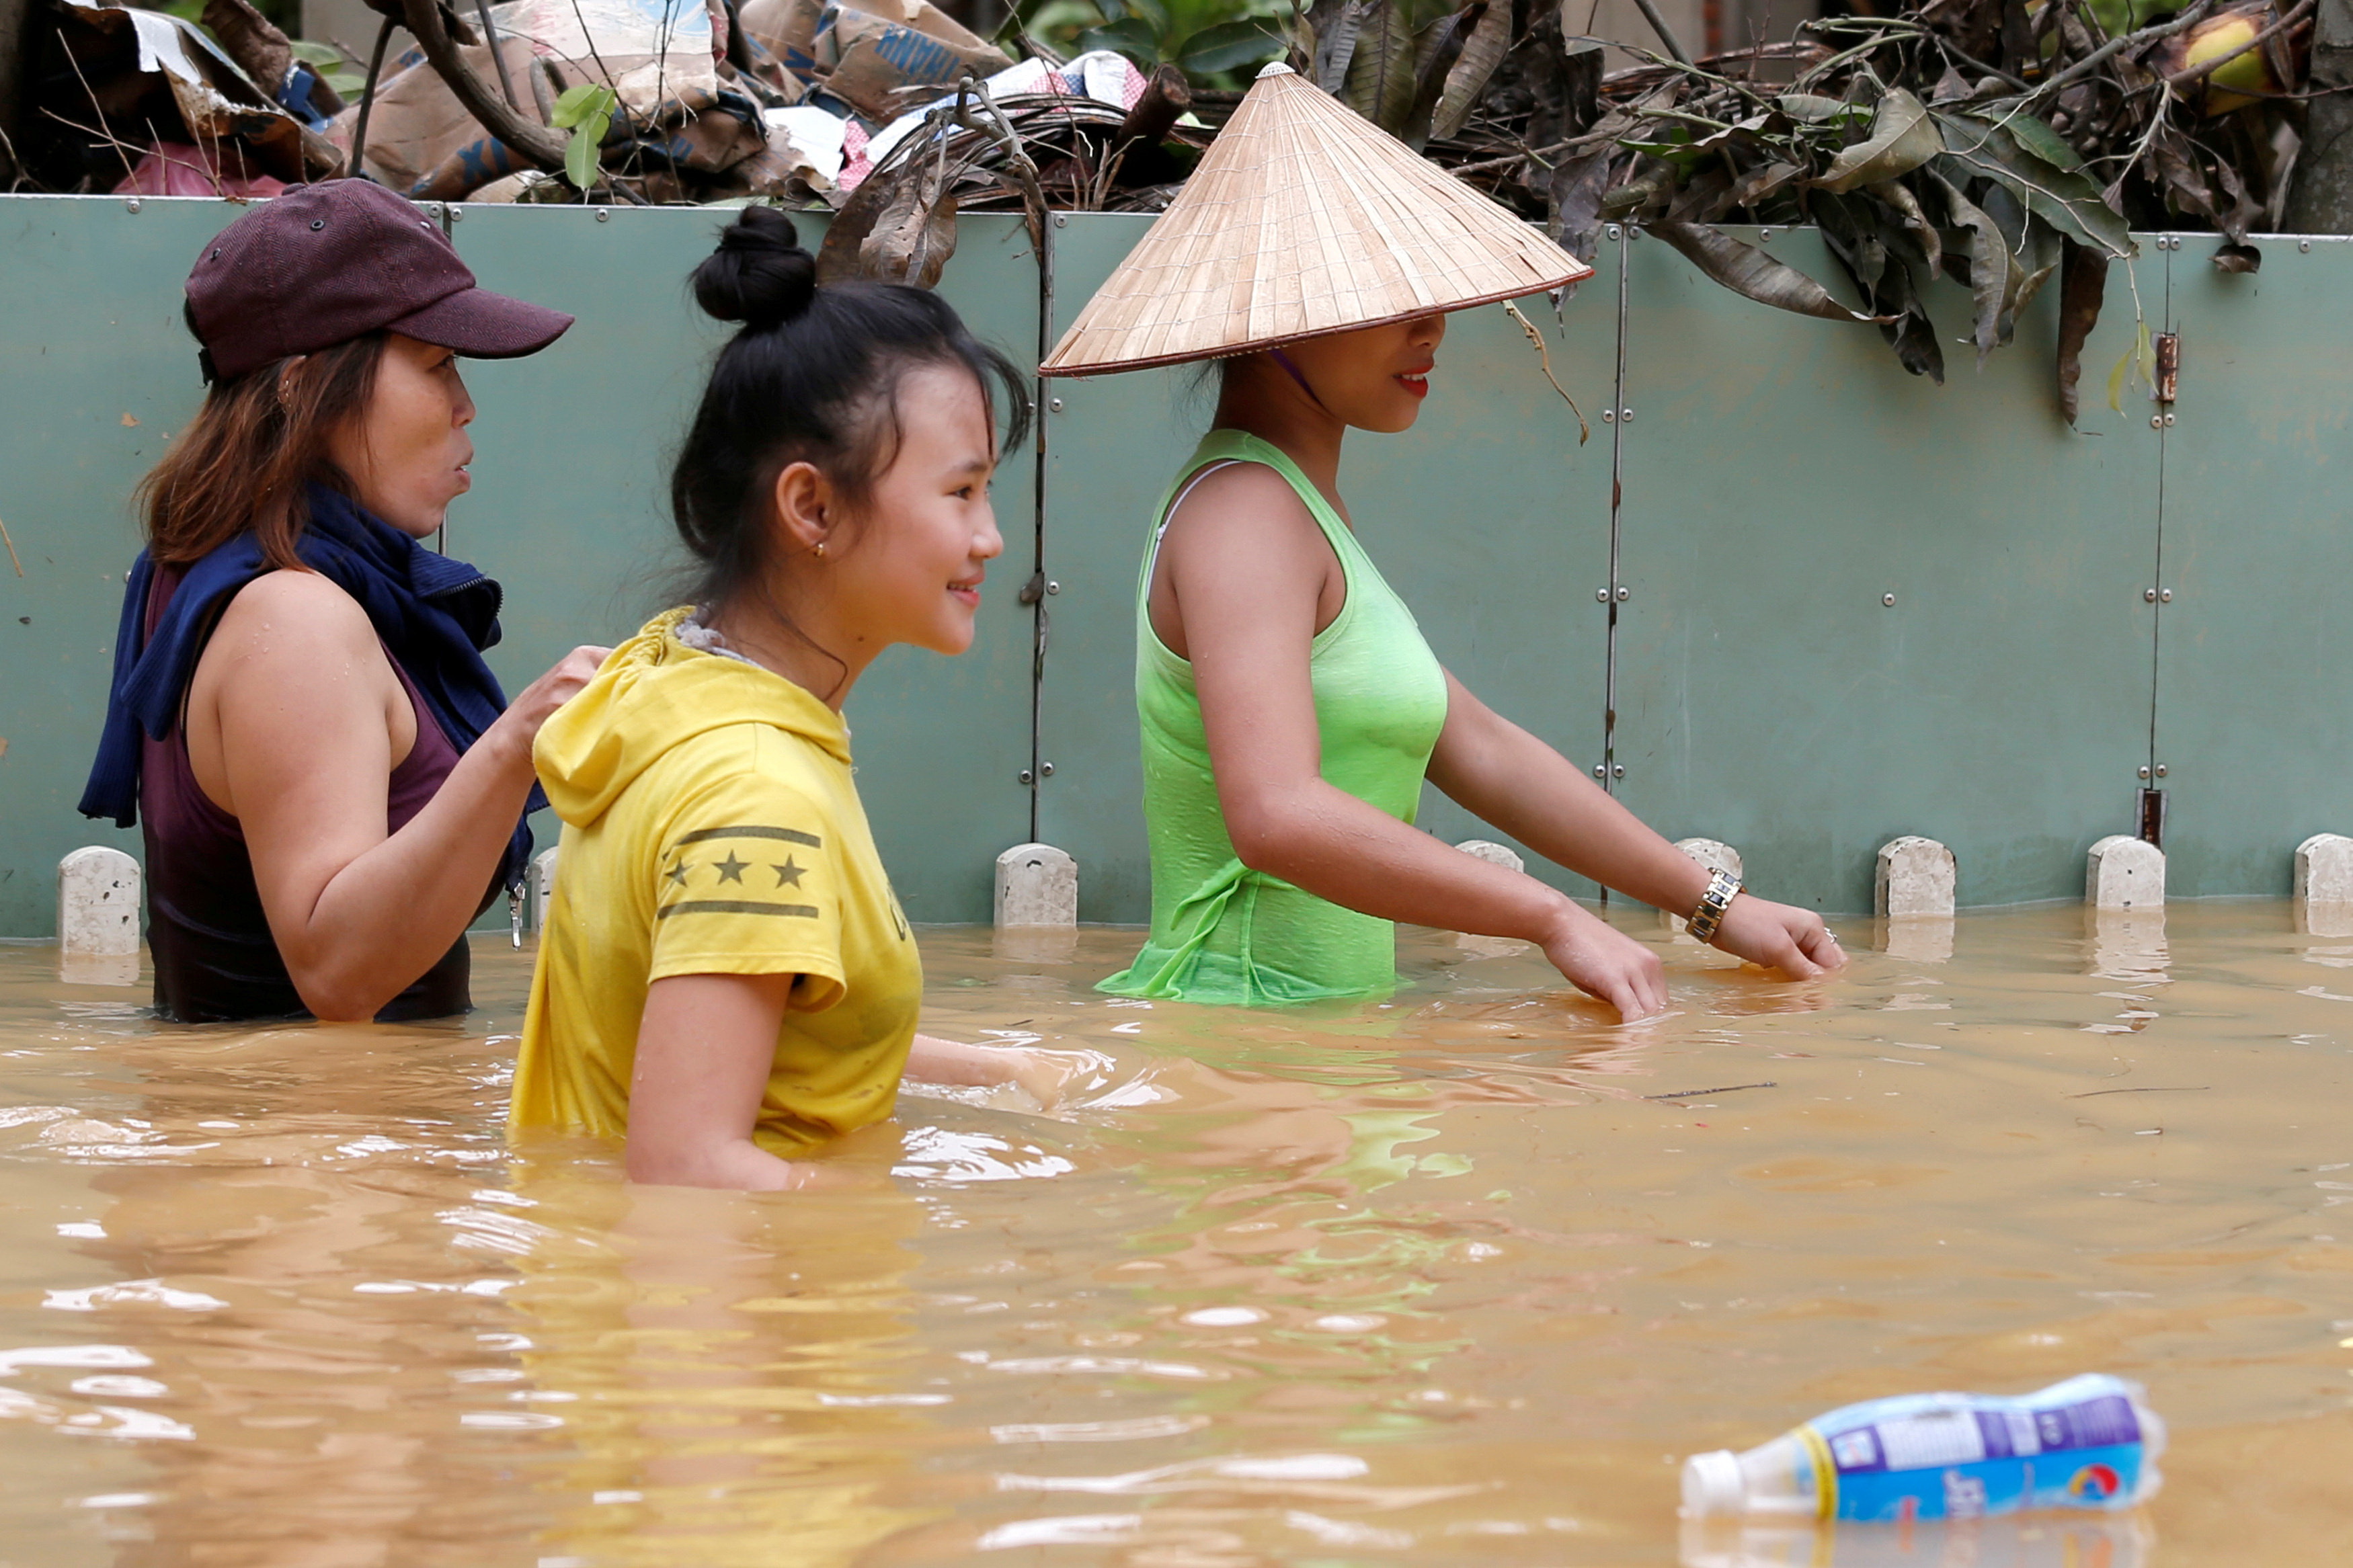 Women wade through floodwaters brought by Typhoon Damrey in the ancient UNESCO heritage town of Hoi An, Vietnam November 7, 2017. Photo: Reuters